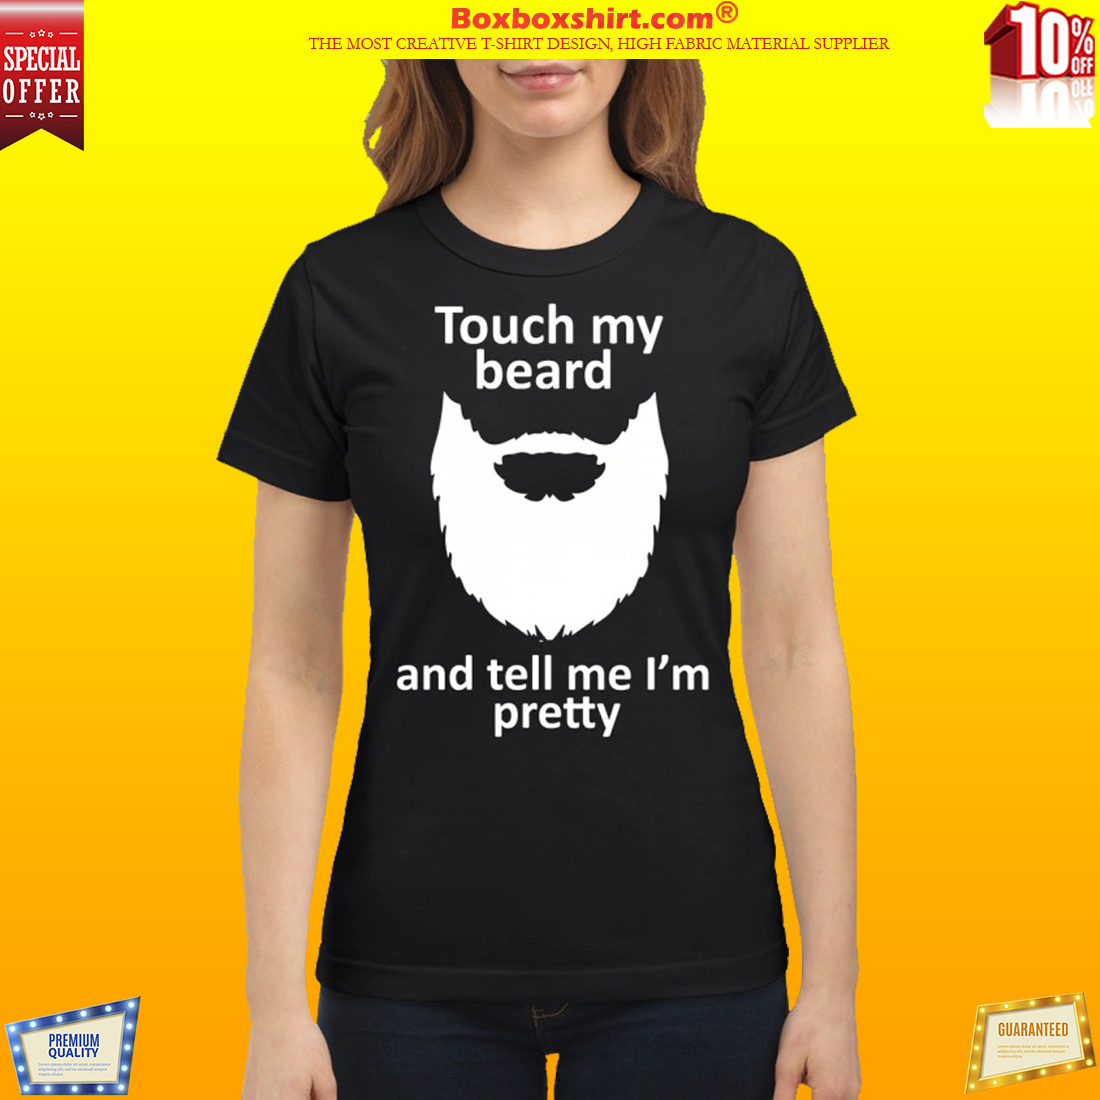 Touch my beard and tell me I'm pretty classic shirt